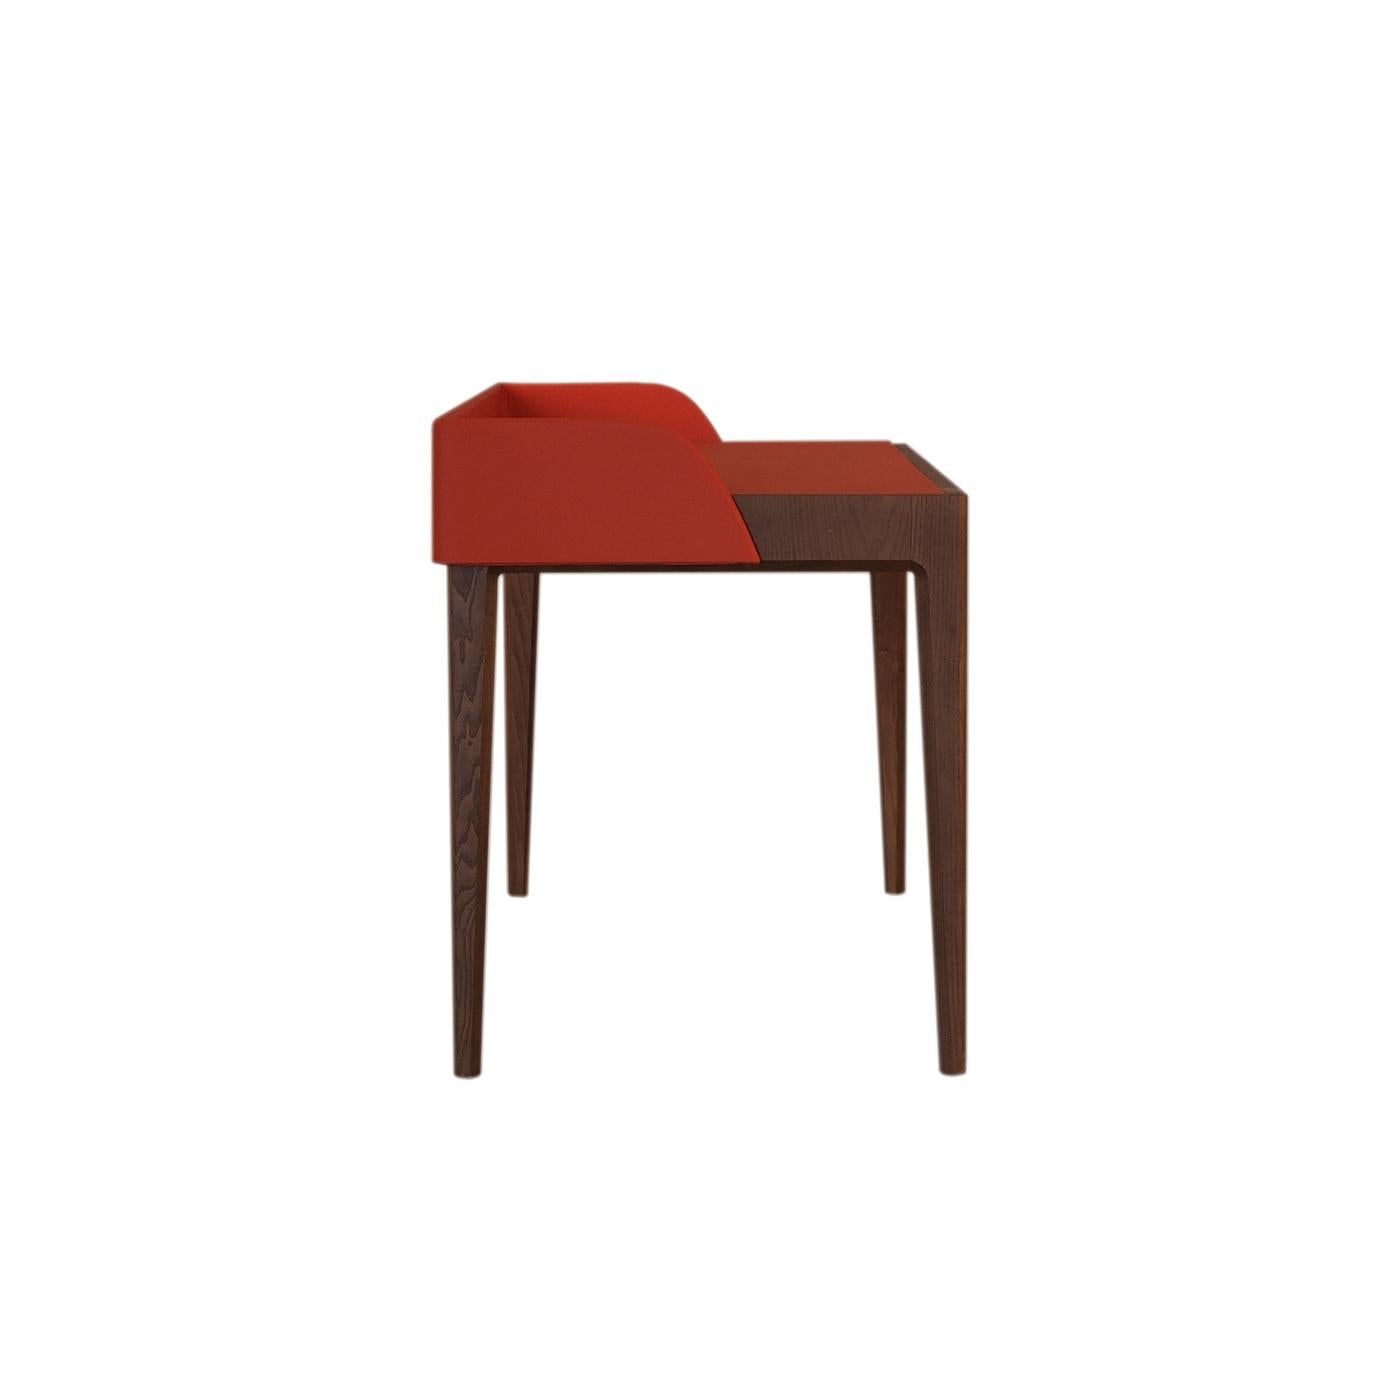 The glamorous combination of the leather's red hues and the ash wood's warm walnut finish renders this outstanding desk a captivating object of functional decor. The slender frame boasts comprises four tapered legs sustaining the top equipped with a